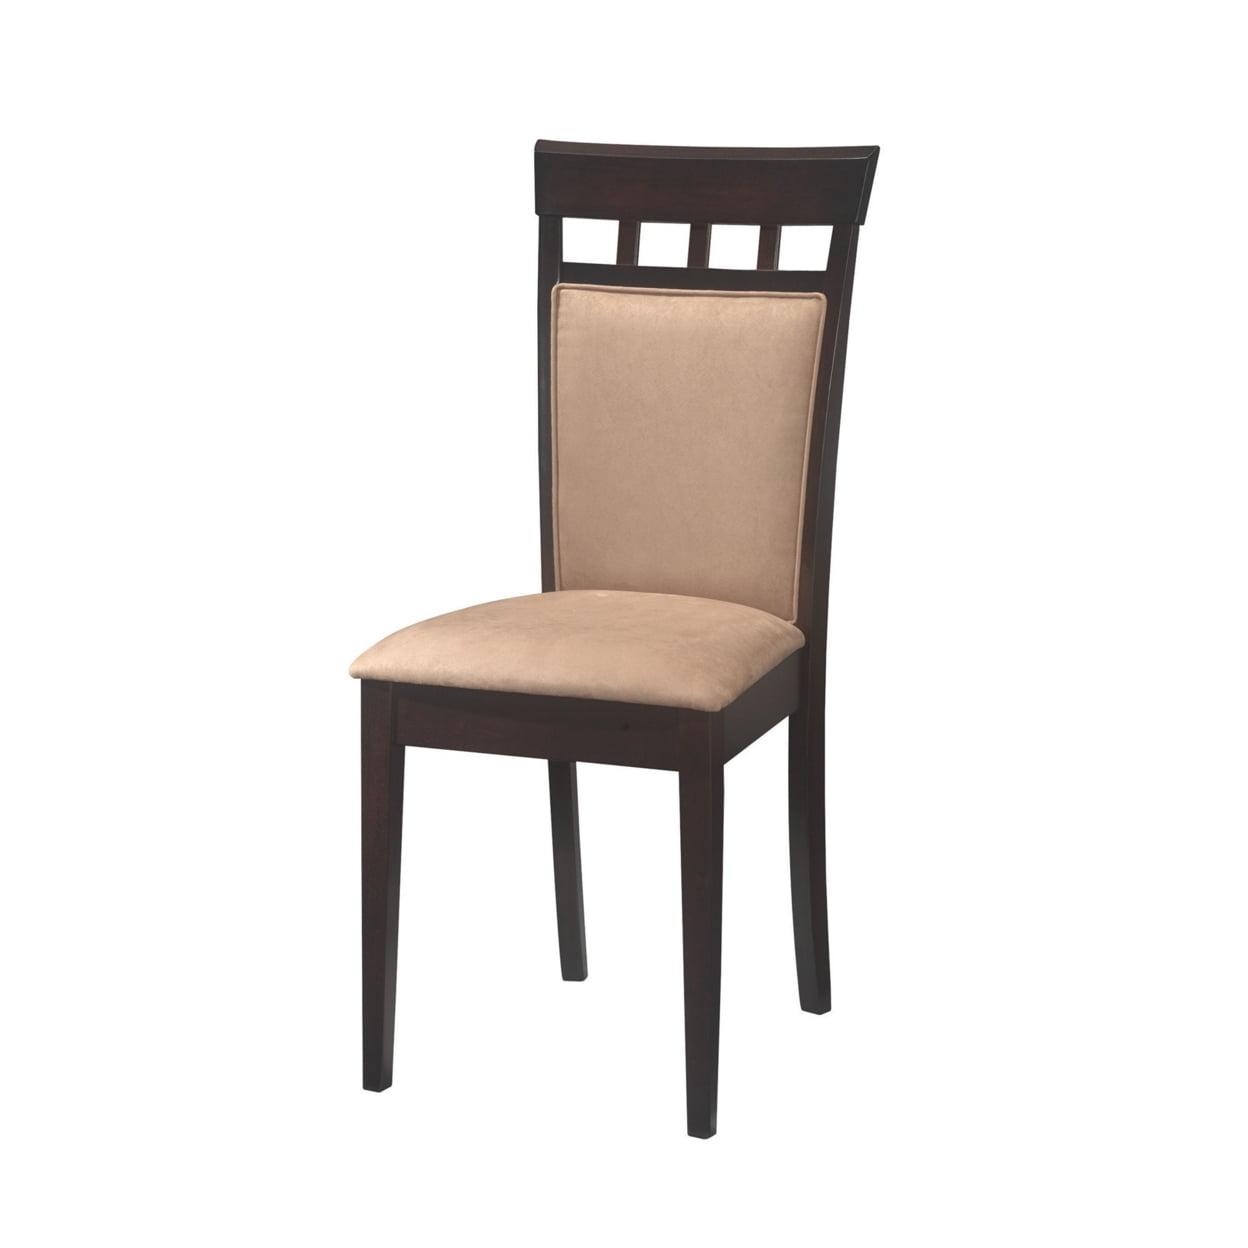 High-Back Beige Microfiber Upholstered Side Chair in Cappuccino Wood